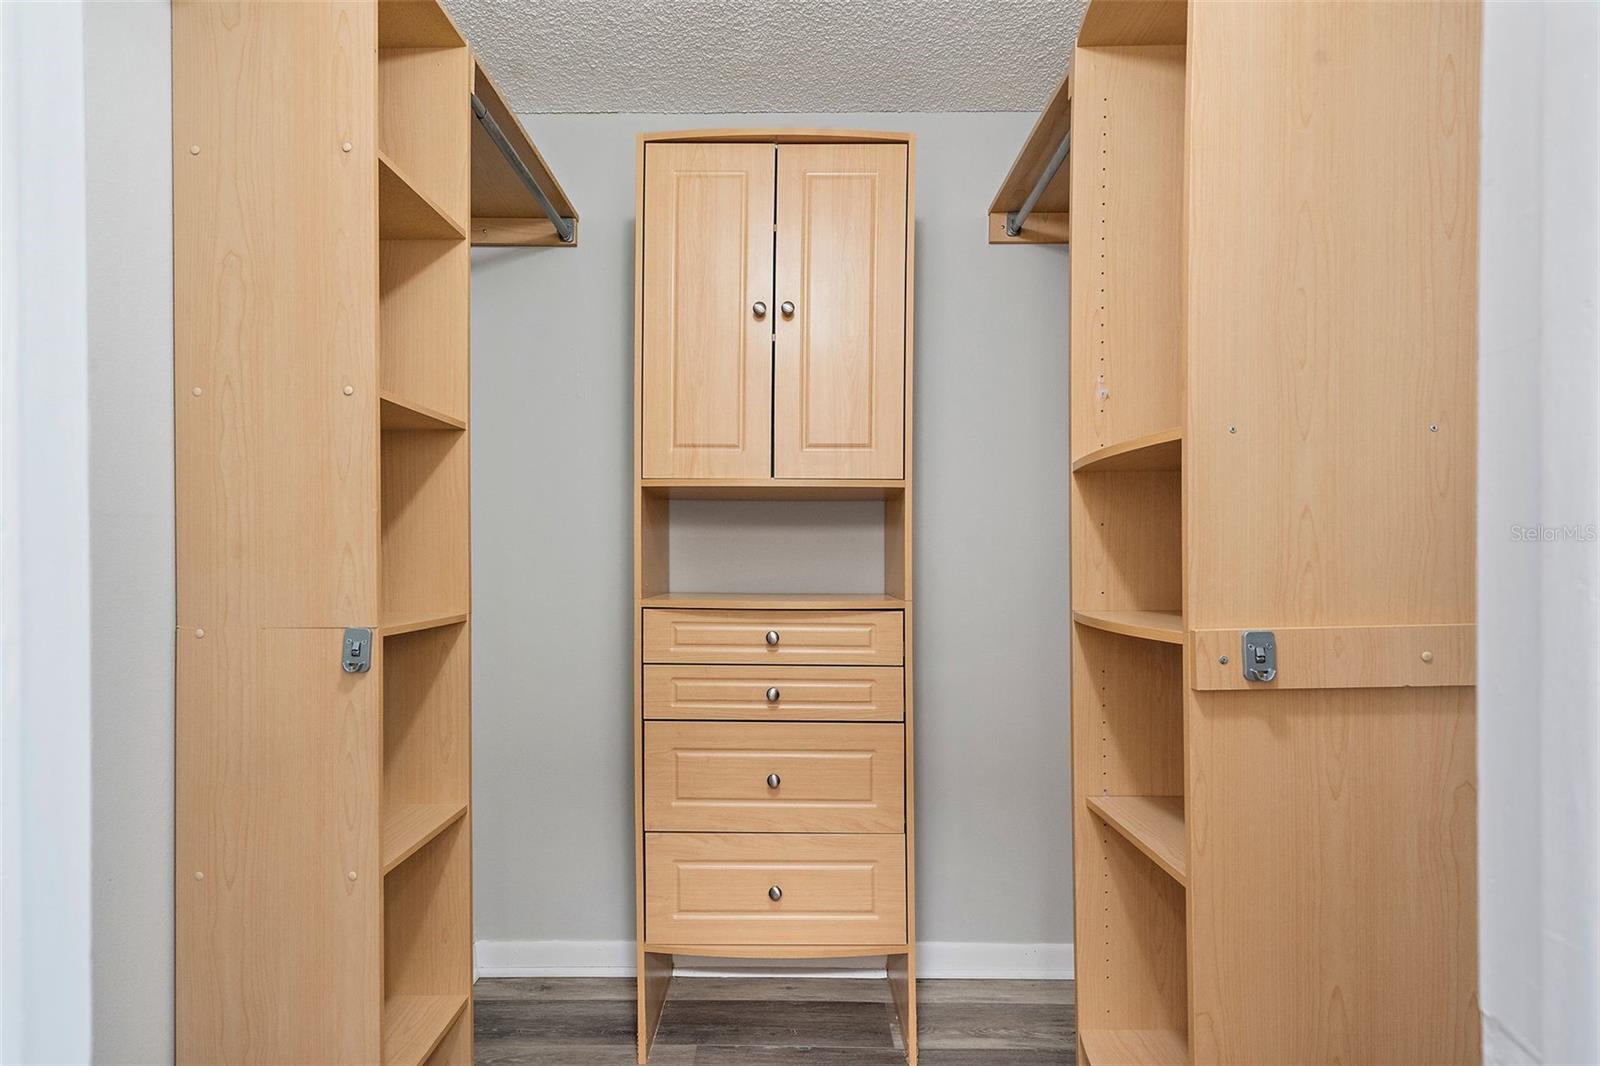 Walk in closet with built in storage system.